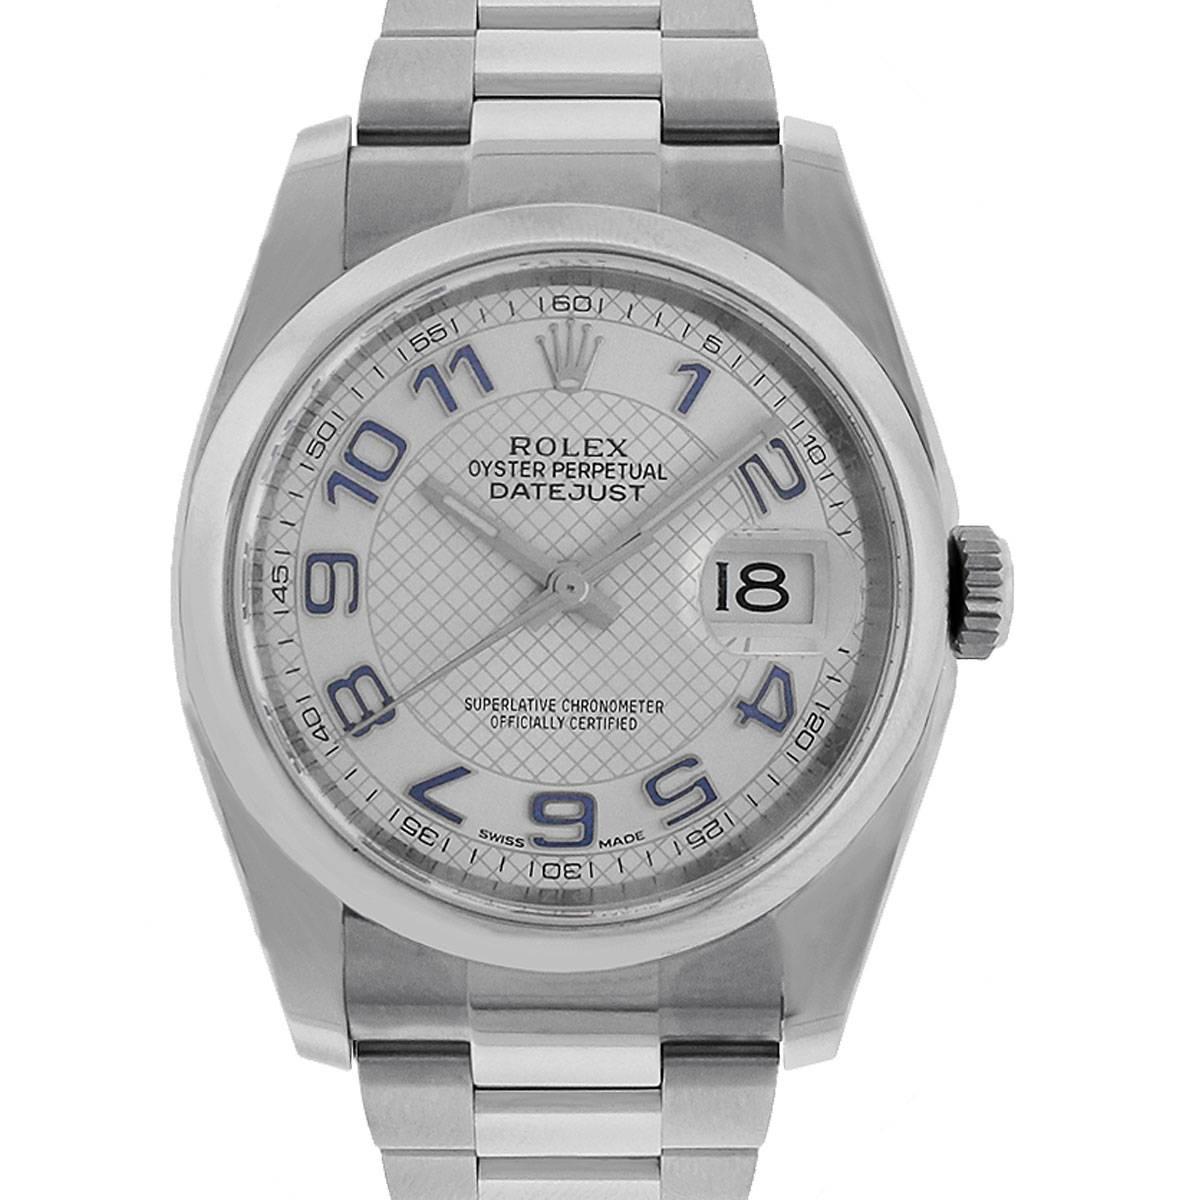 Brand is Rolex. Style is Datejust Silvered slick Dial Stainless Steel Watch. MPN 116200. Serial is Scrambled Series. Stainless Steel case. Case Diameter is
36mm. Stainless Steel polished bezel. Decorated Arabic dial. Stainless Steel bracelet.